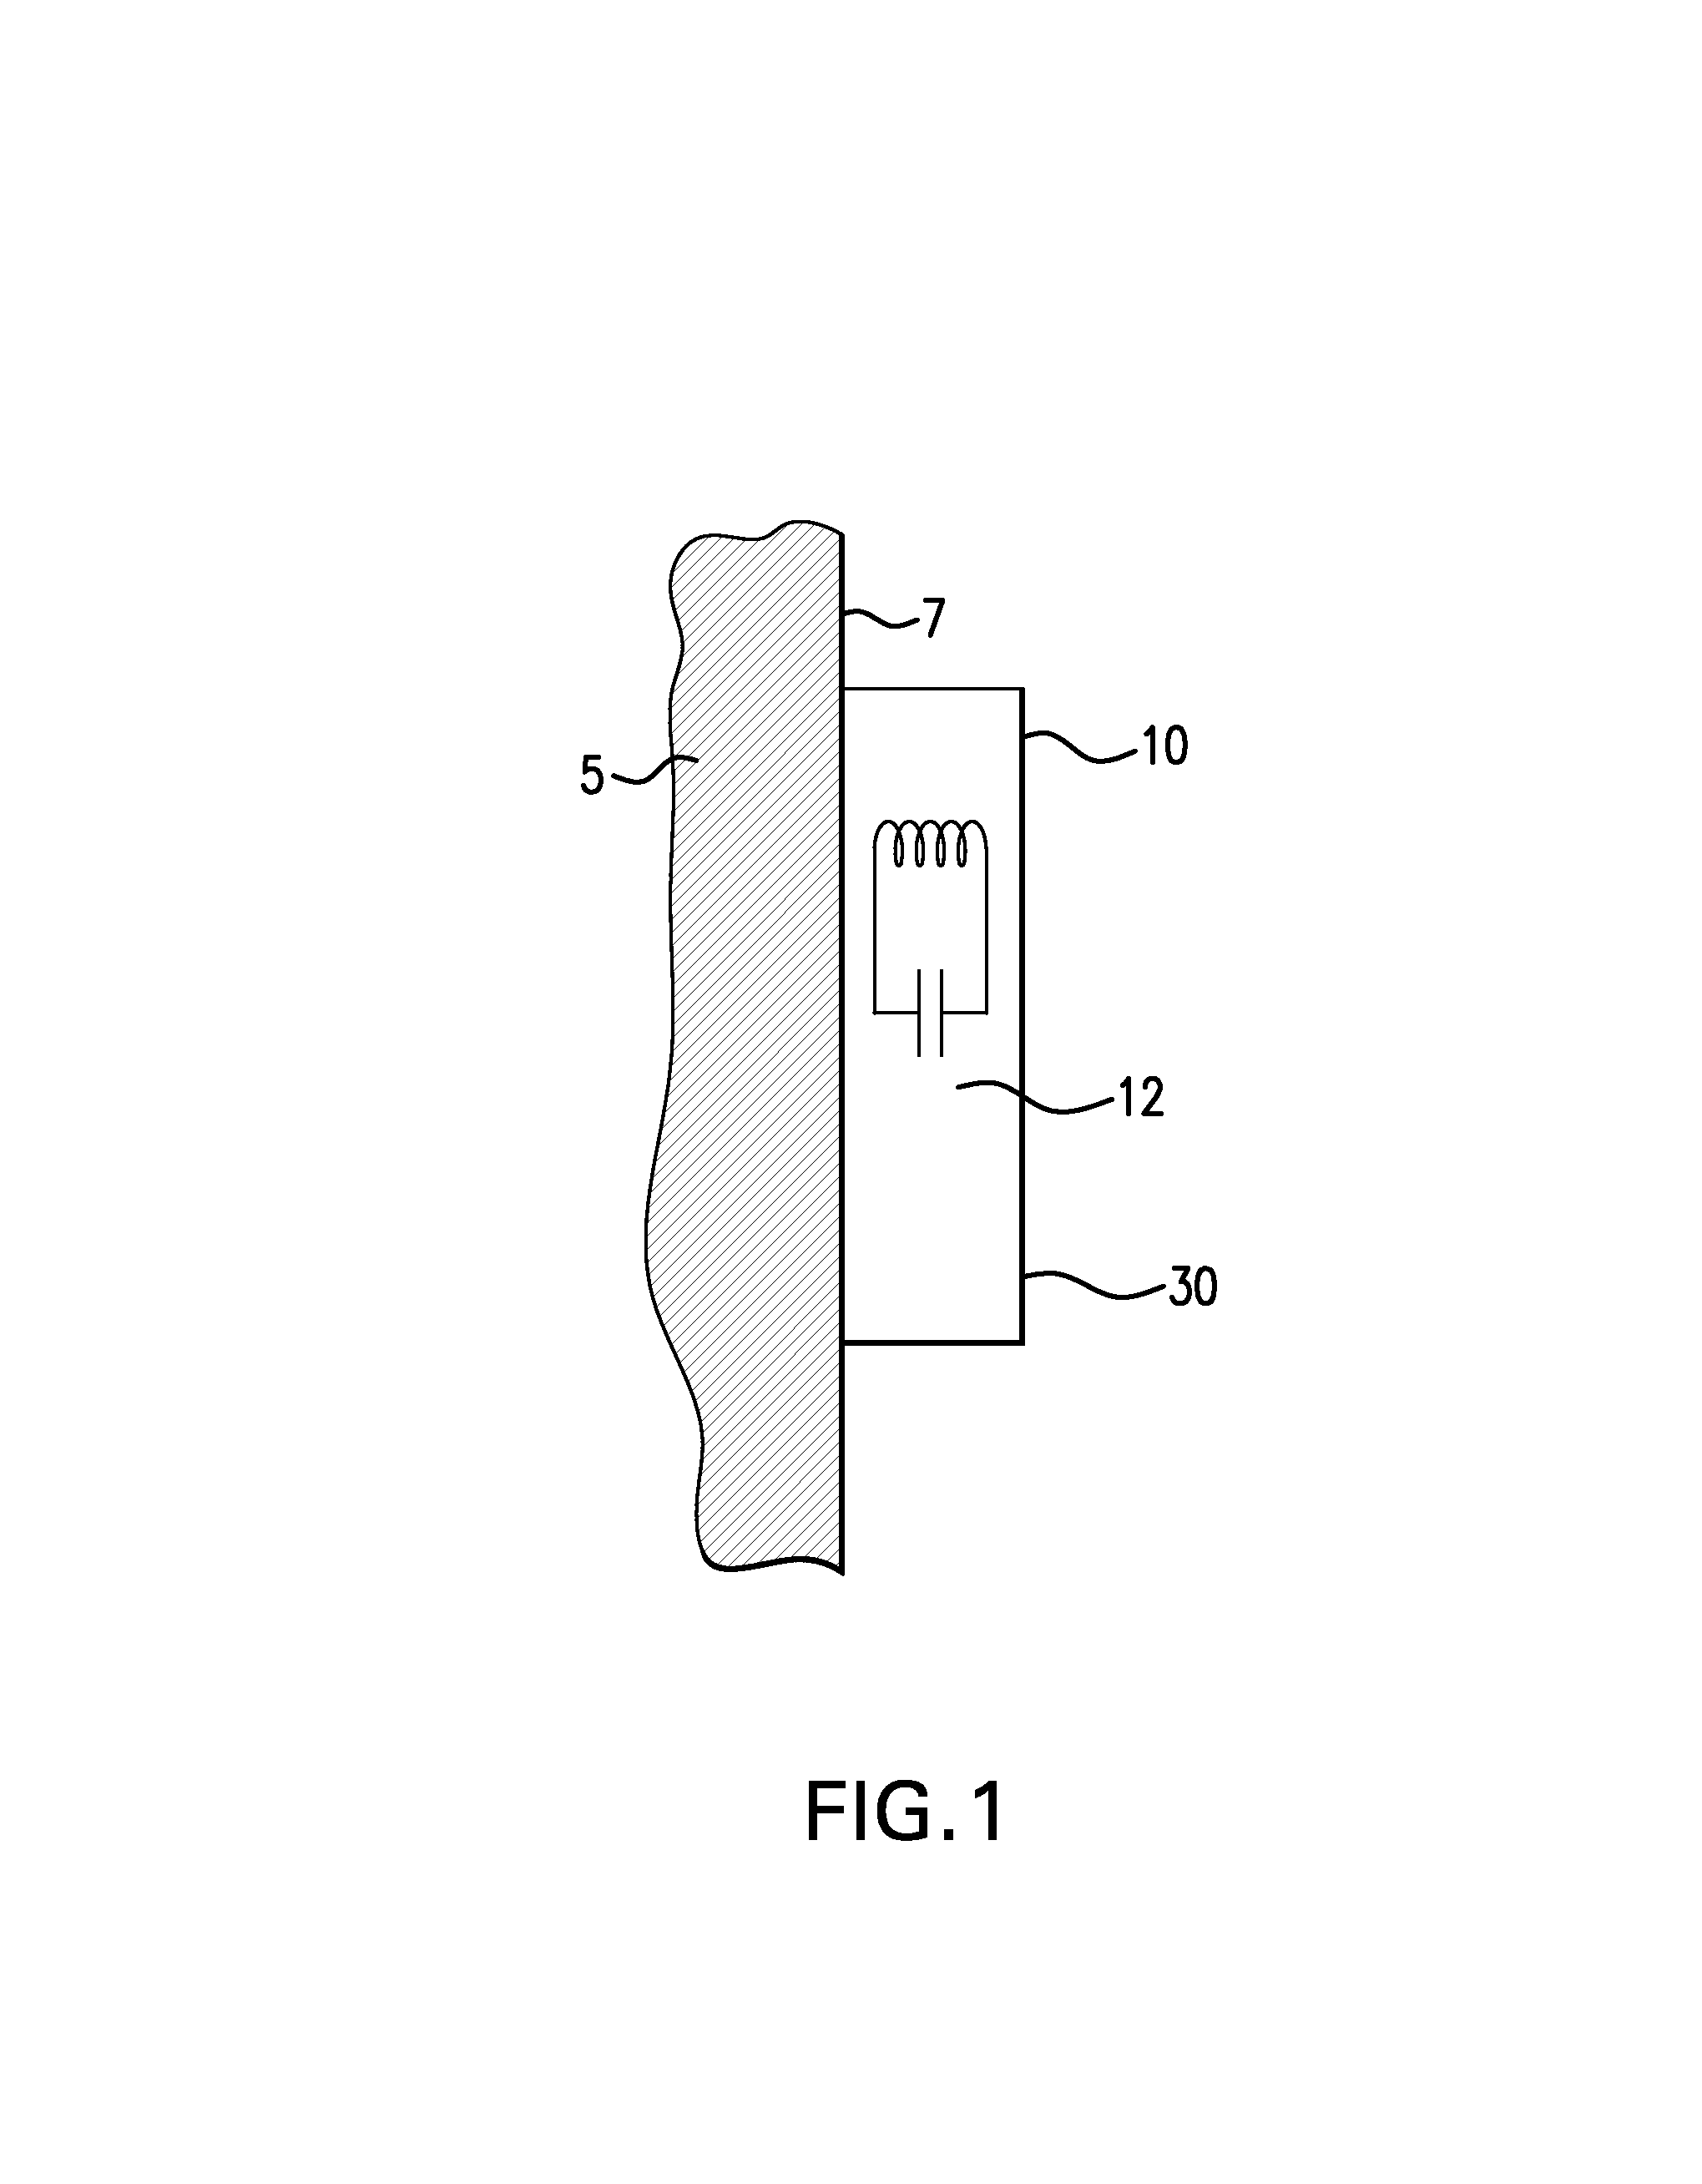 Strain monitoring system and apparatus